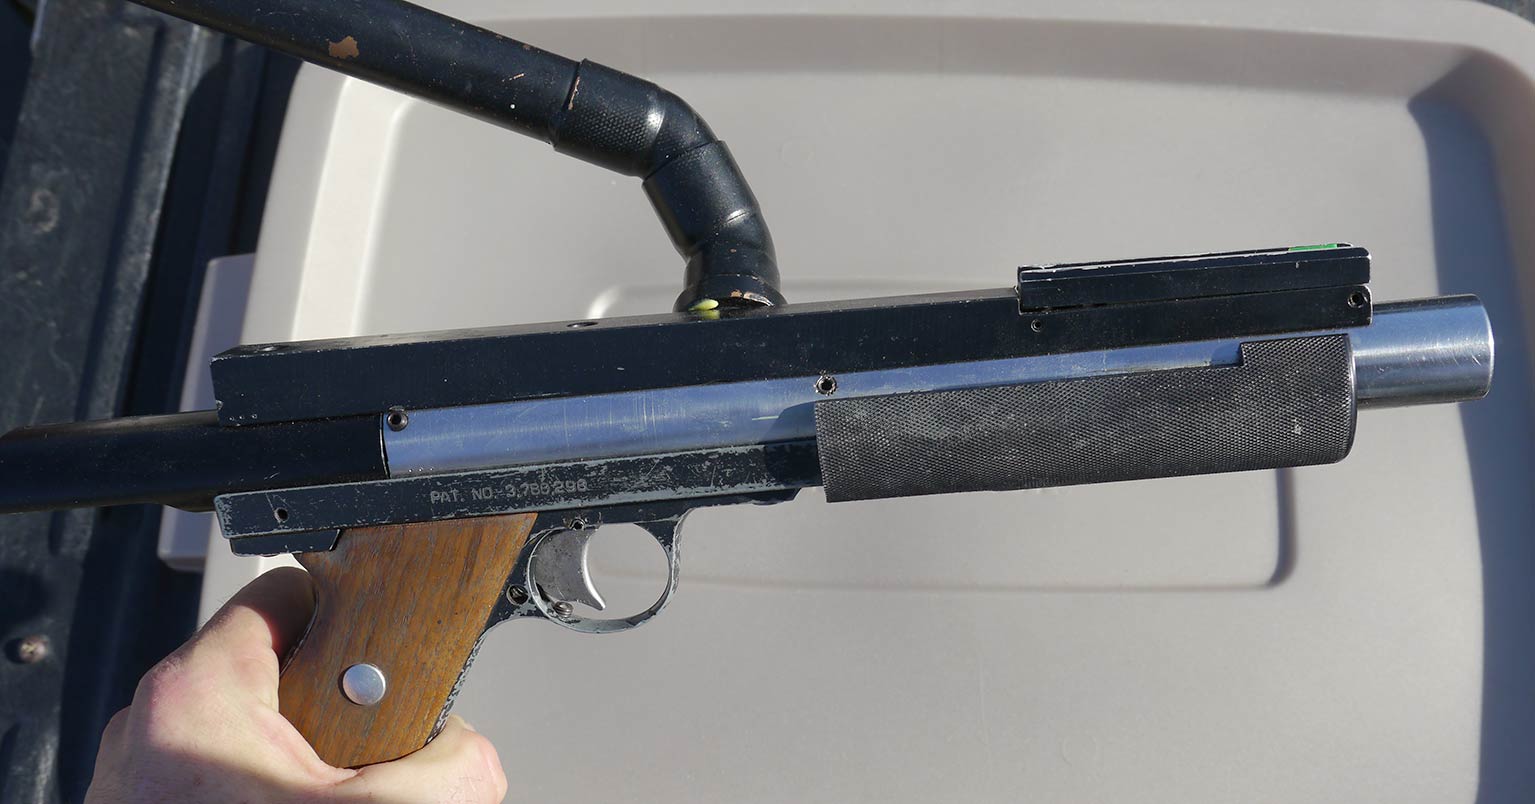 Jack Wada's Stan Russell Rail Gun. Close up right side.